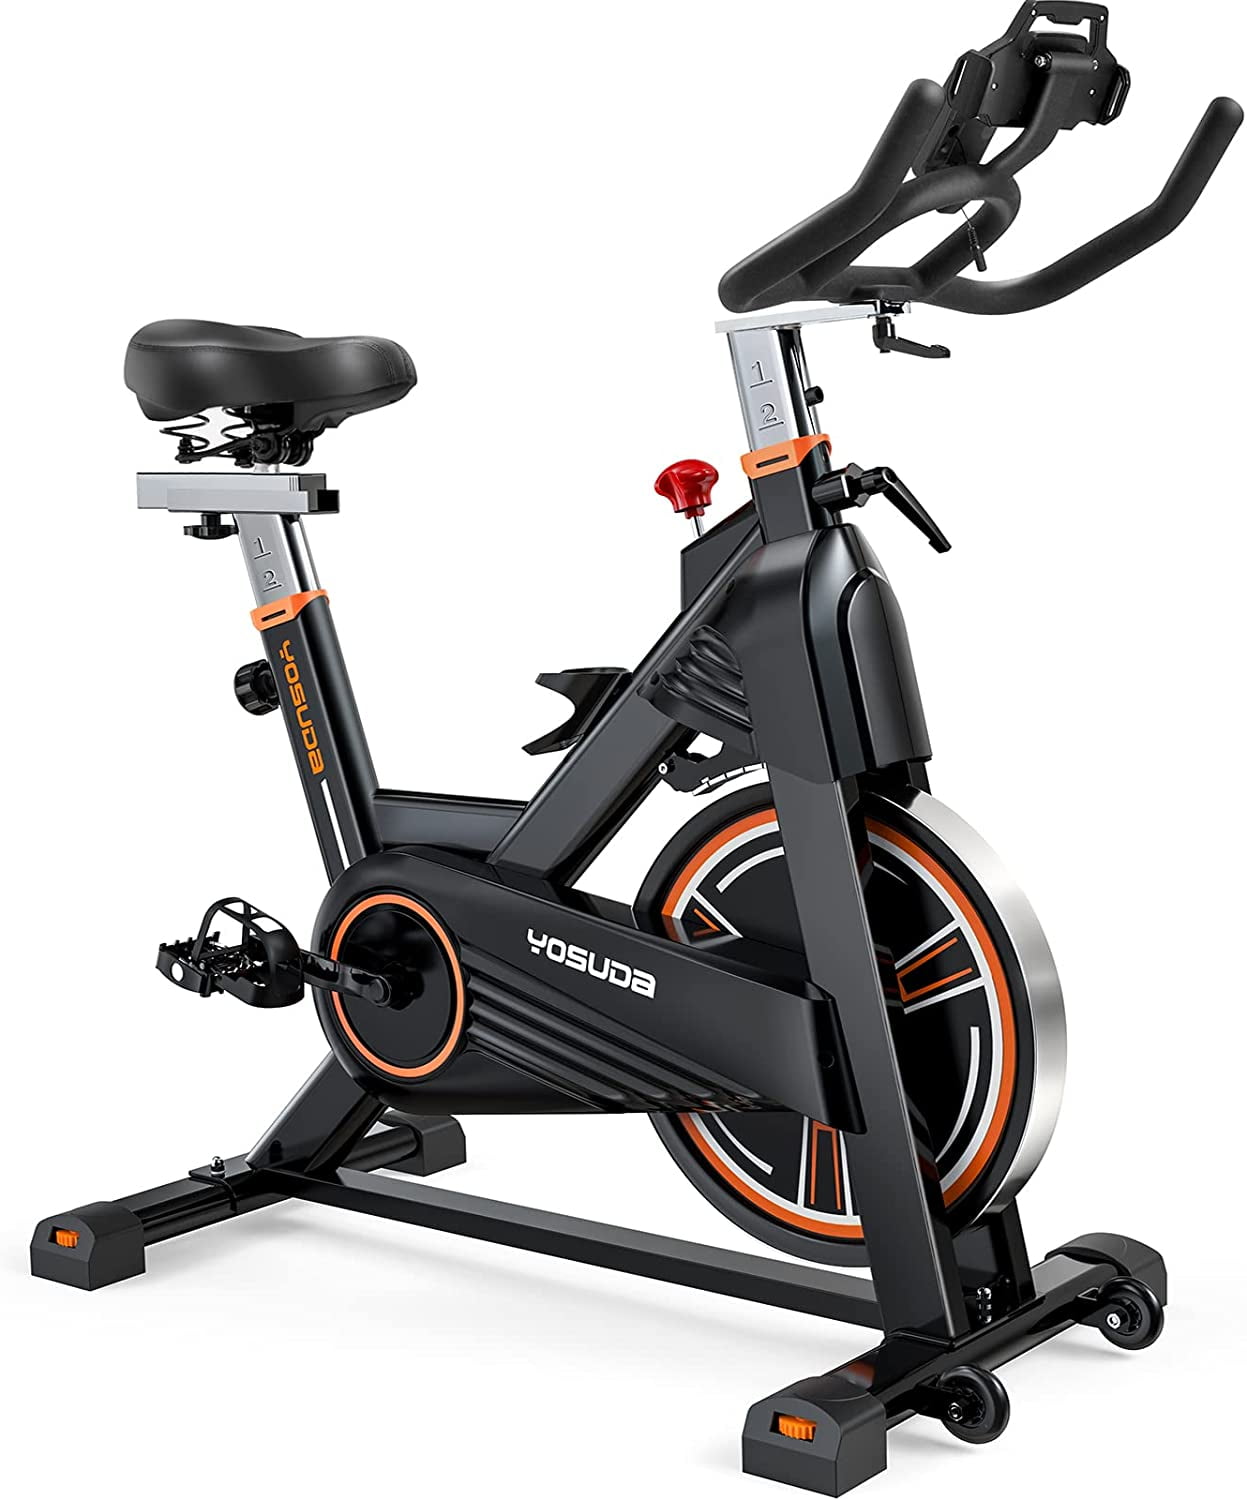 Details about   Bicycle Bike Fitness Gym Exercise Stationary Bike Aerobics Family Indoor USA 